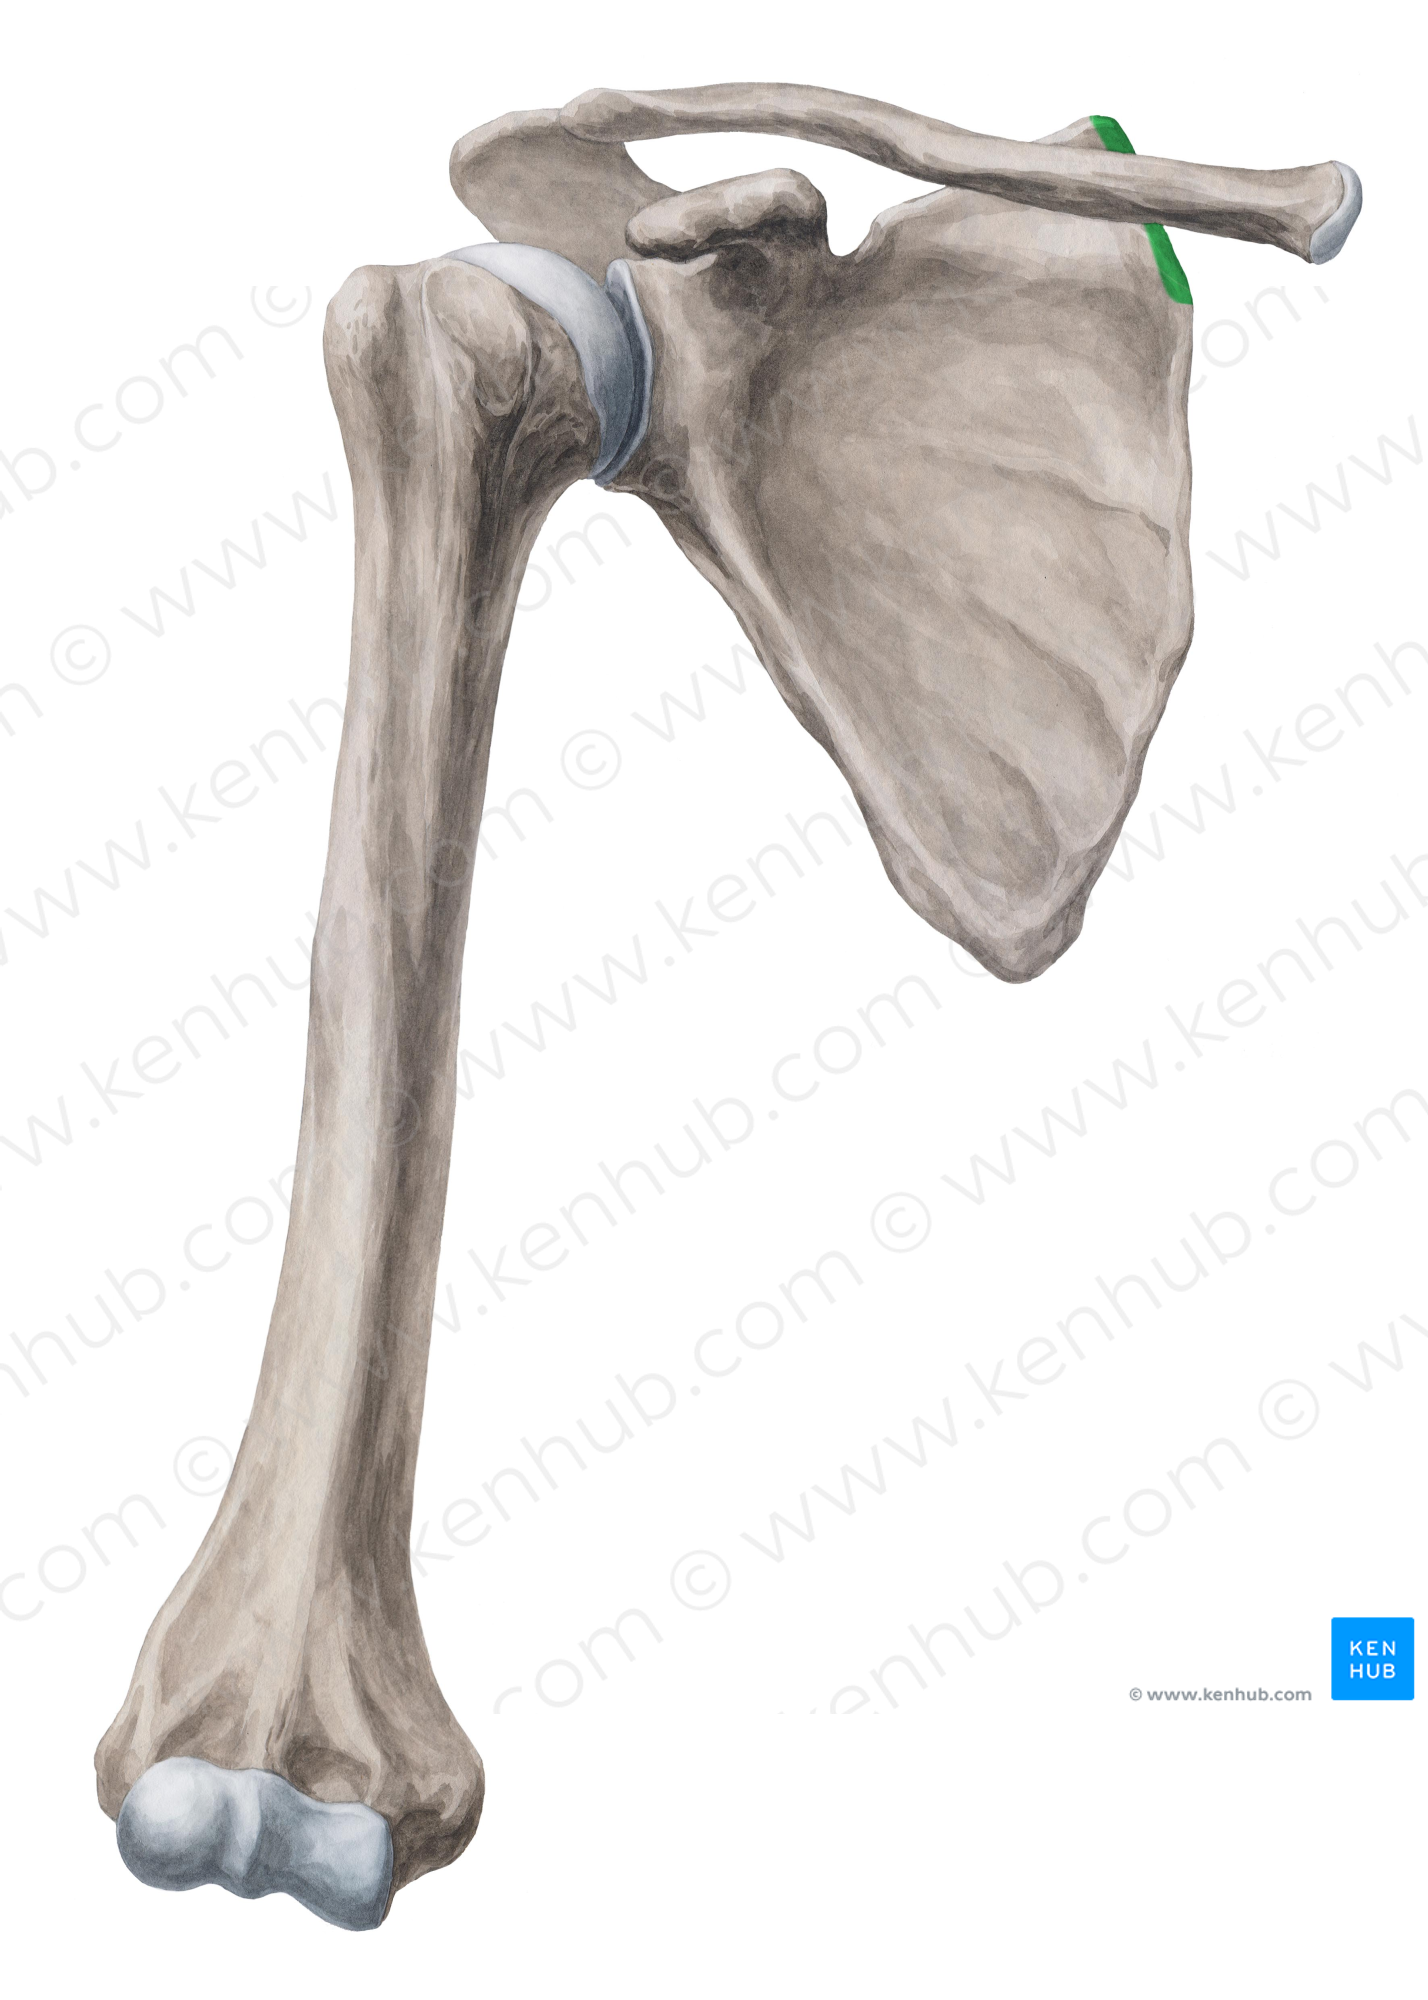 Superior part of medial border of scapula (#7799)